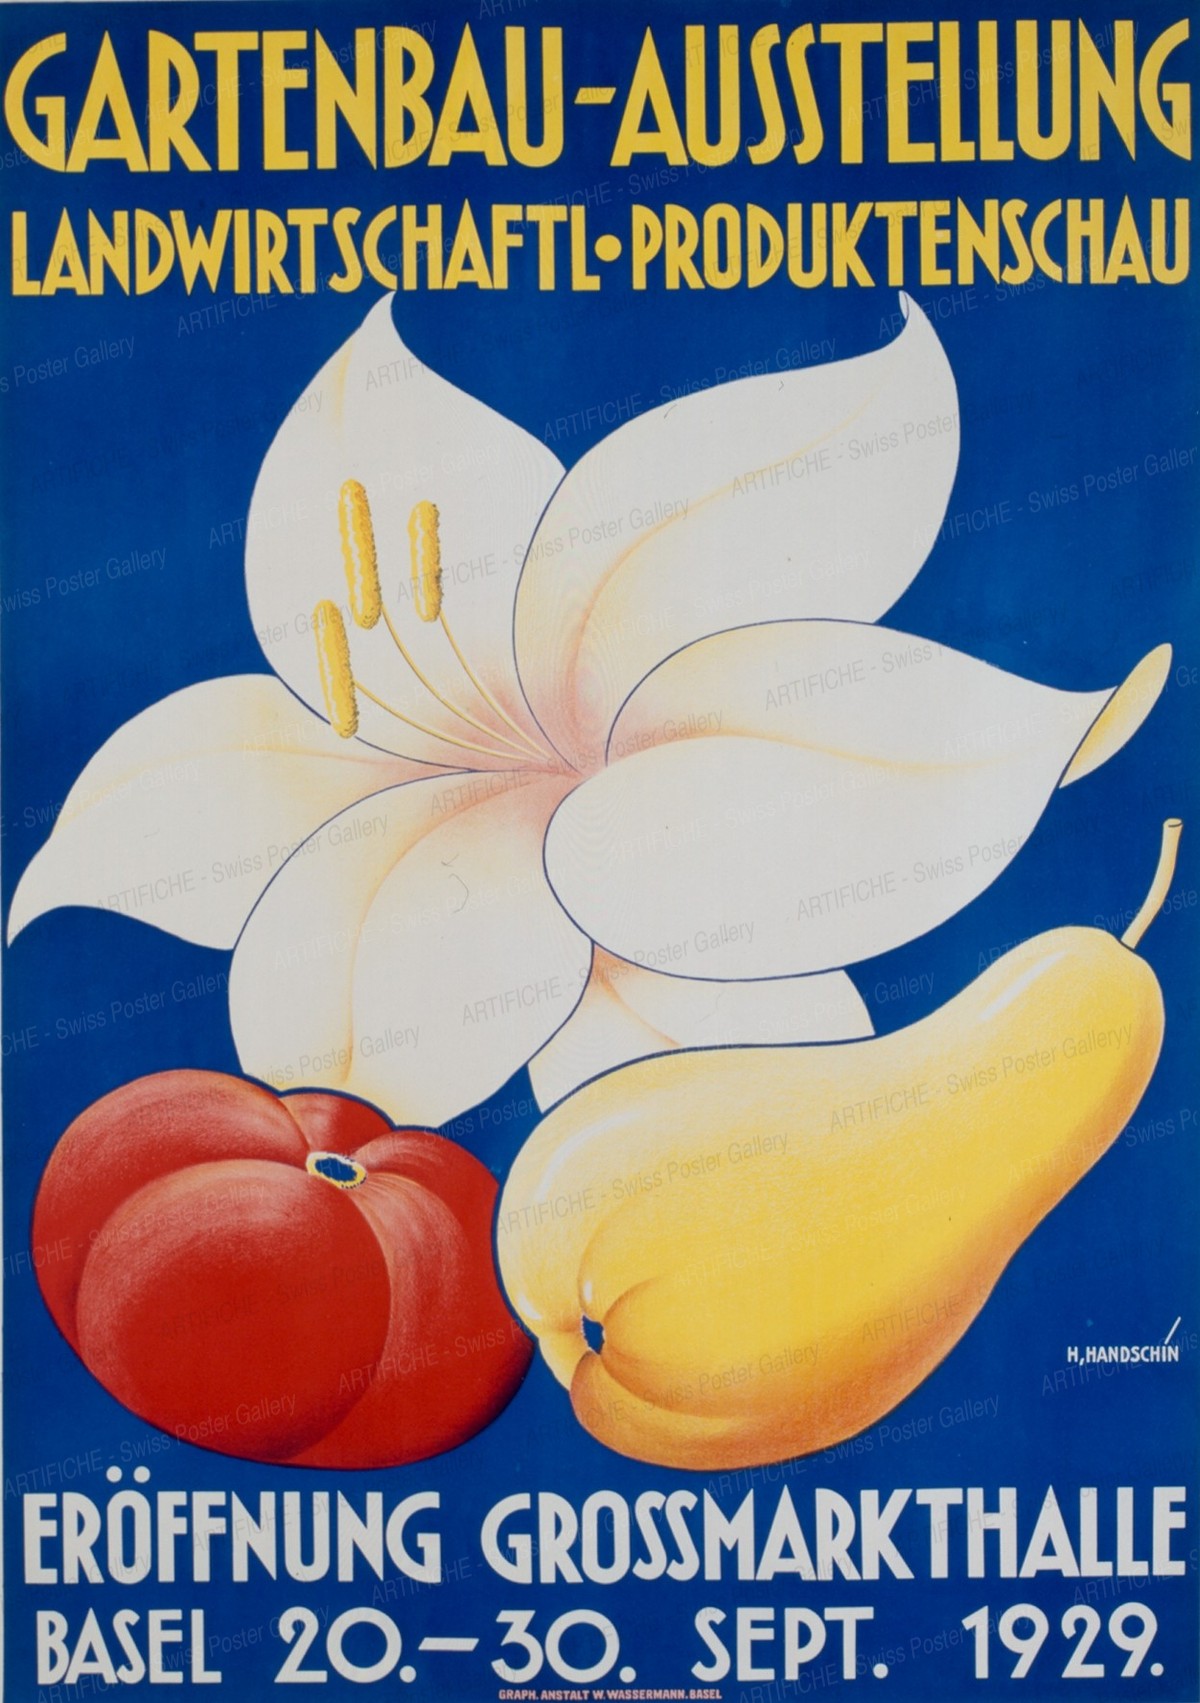 Horticultural Exhibition – Agricultural Products, Johannes Handschin